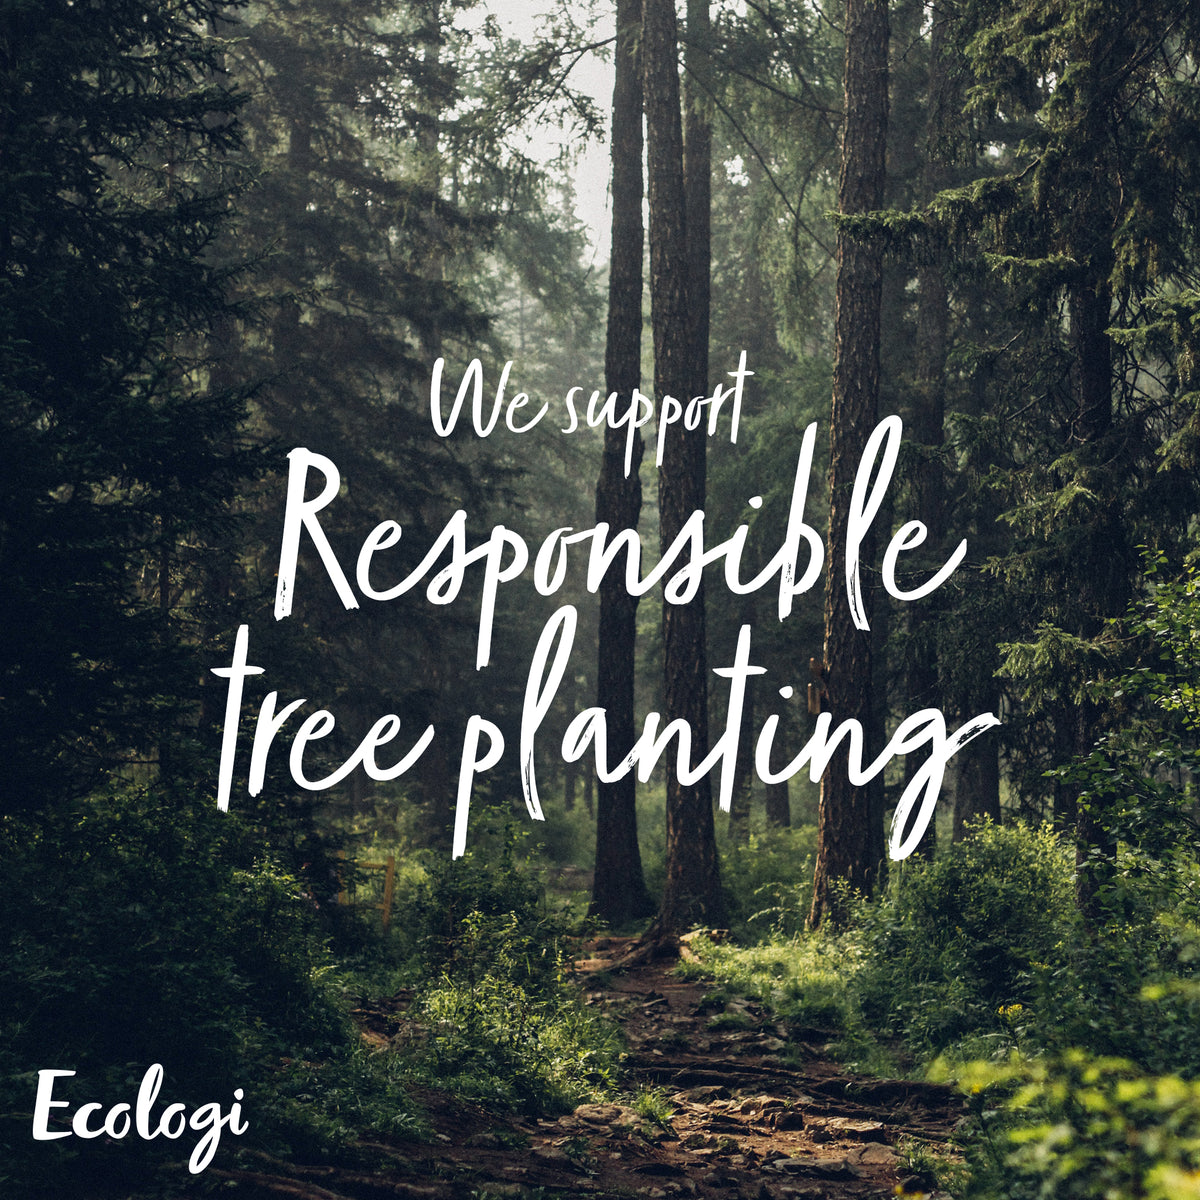 A forest with the words "we support responsible tree planting".